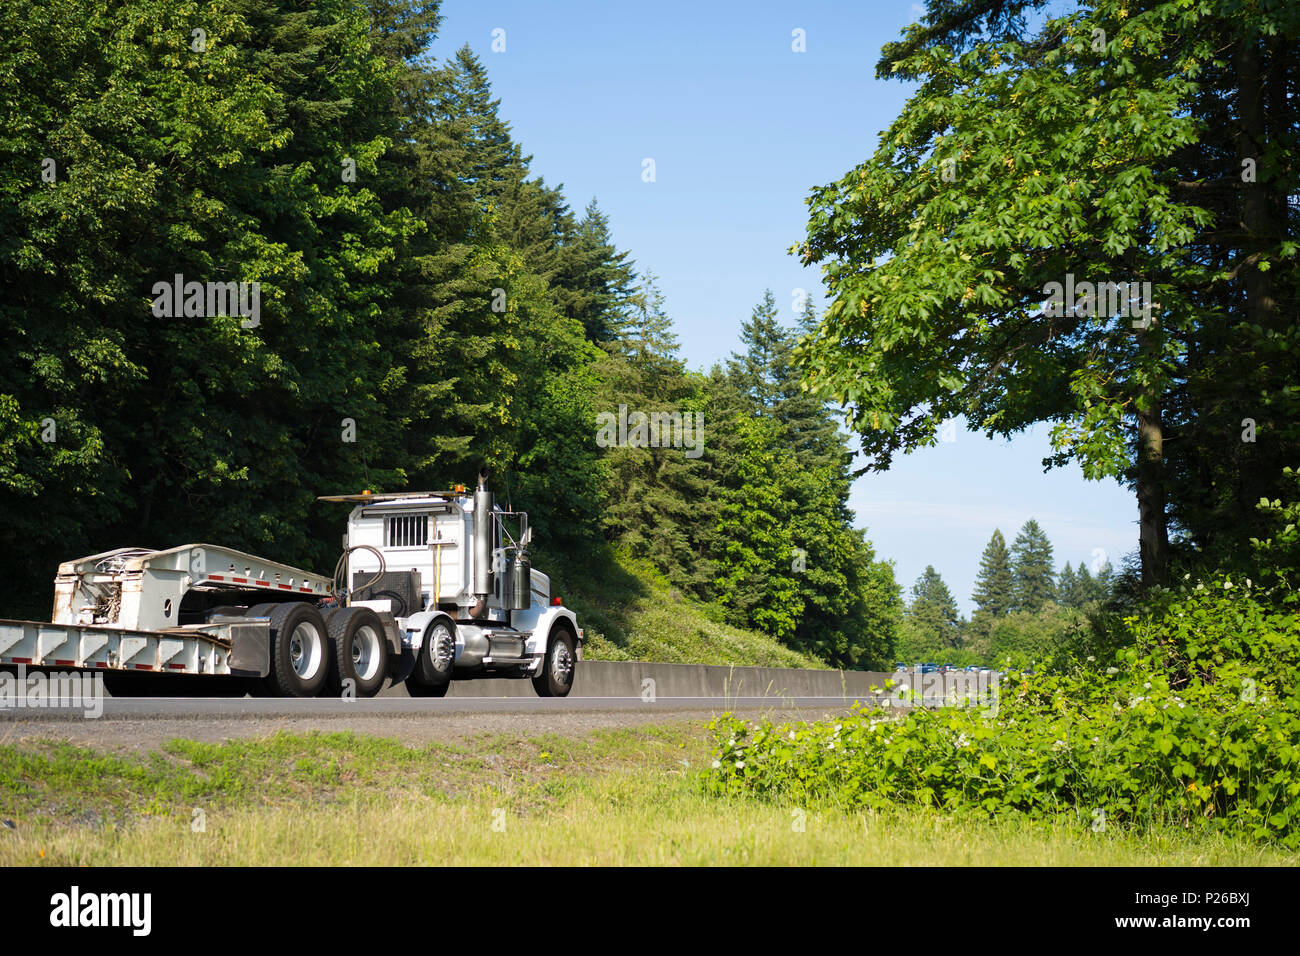 Commercial powerful big rig day cab local haul white semi truck transporting step down semi trailer on the green winding highway with trees for delive Stock Photo